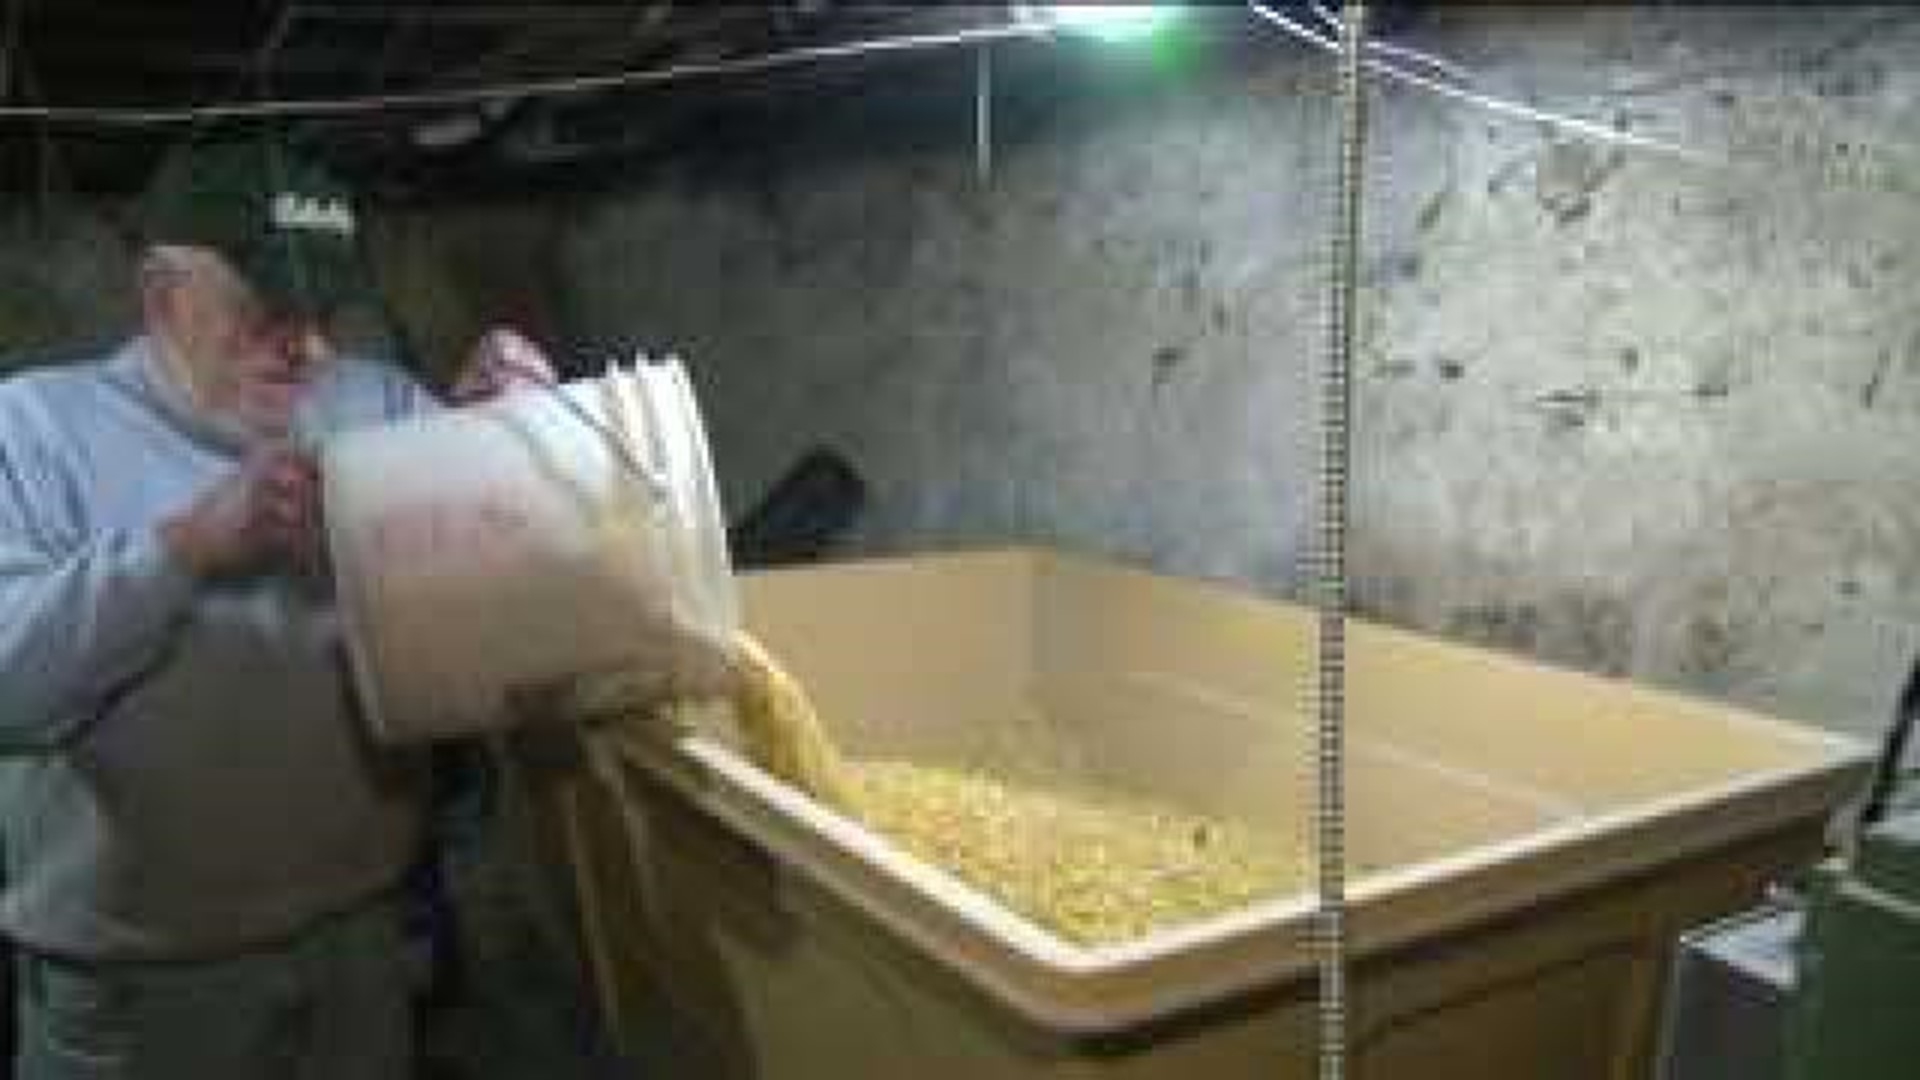 Power To Save: Heating With Corn